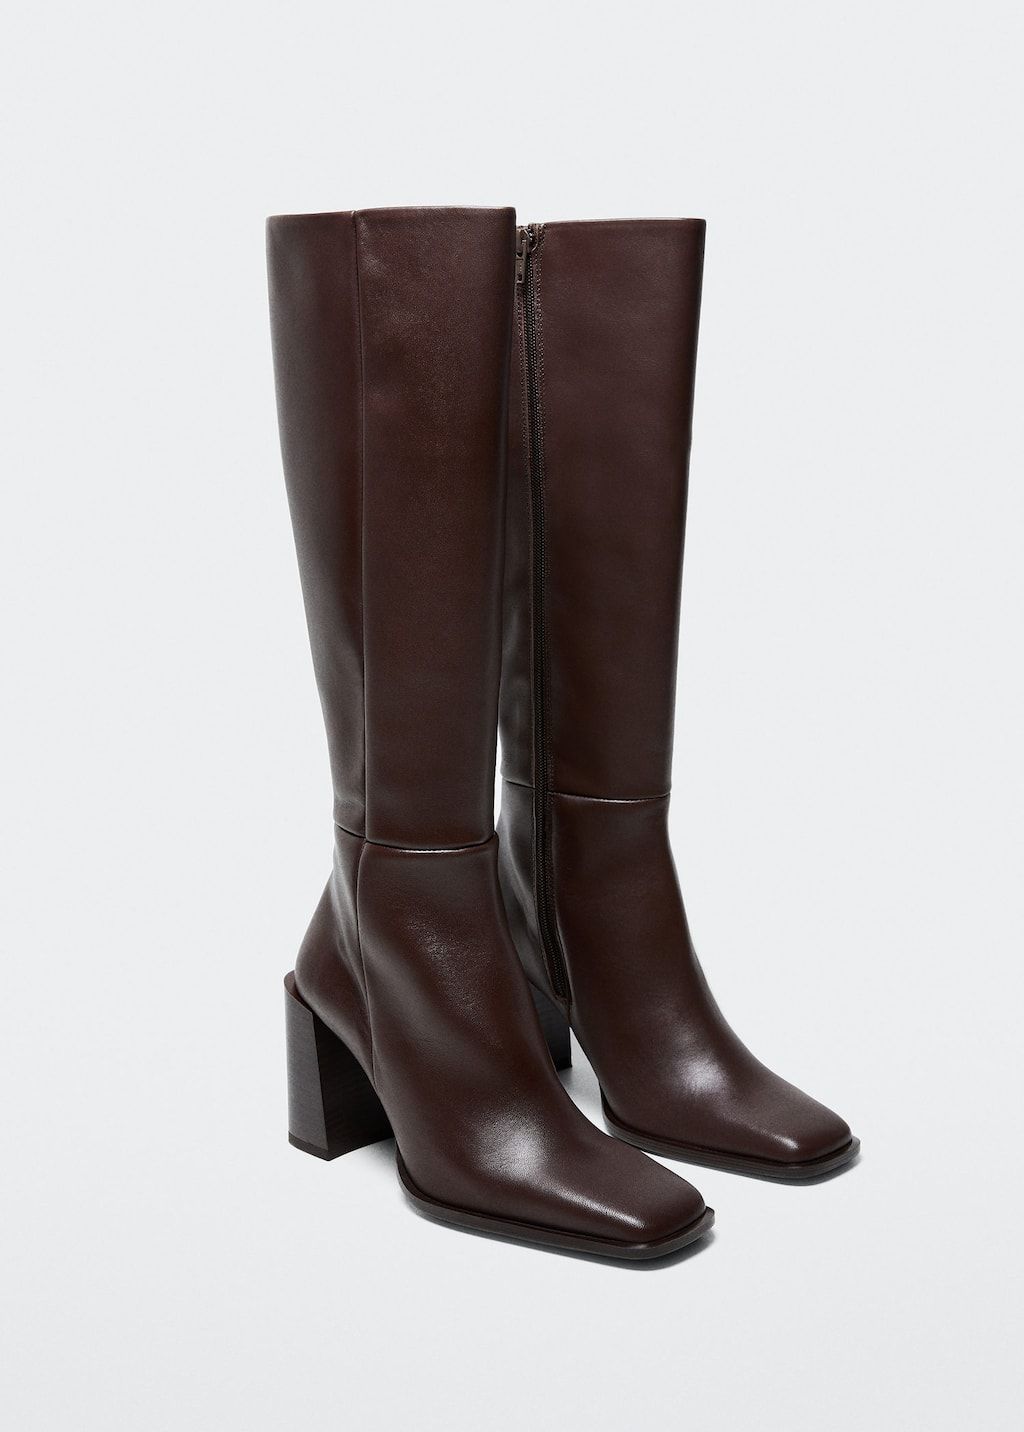 Leather boots for women that will
definitely suits you